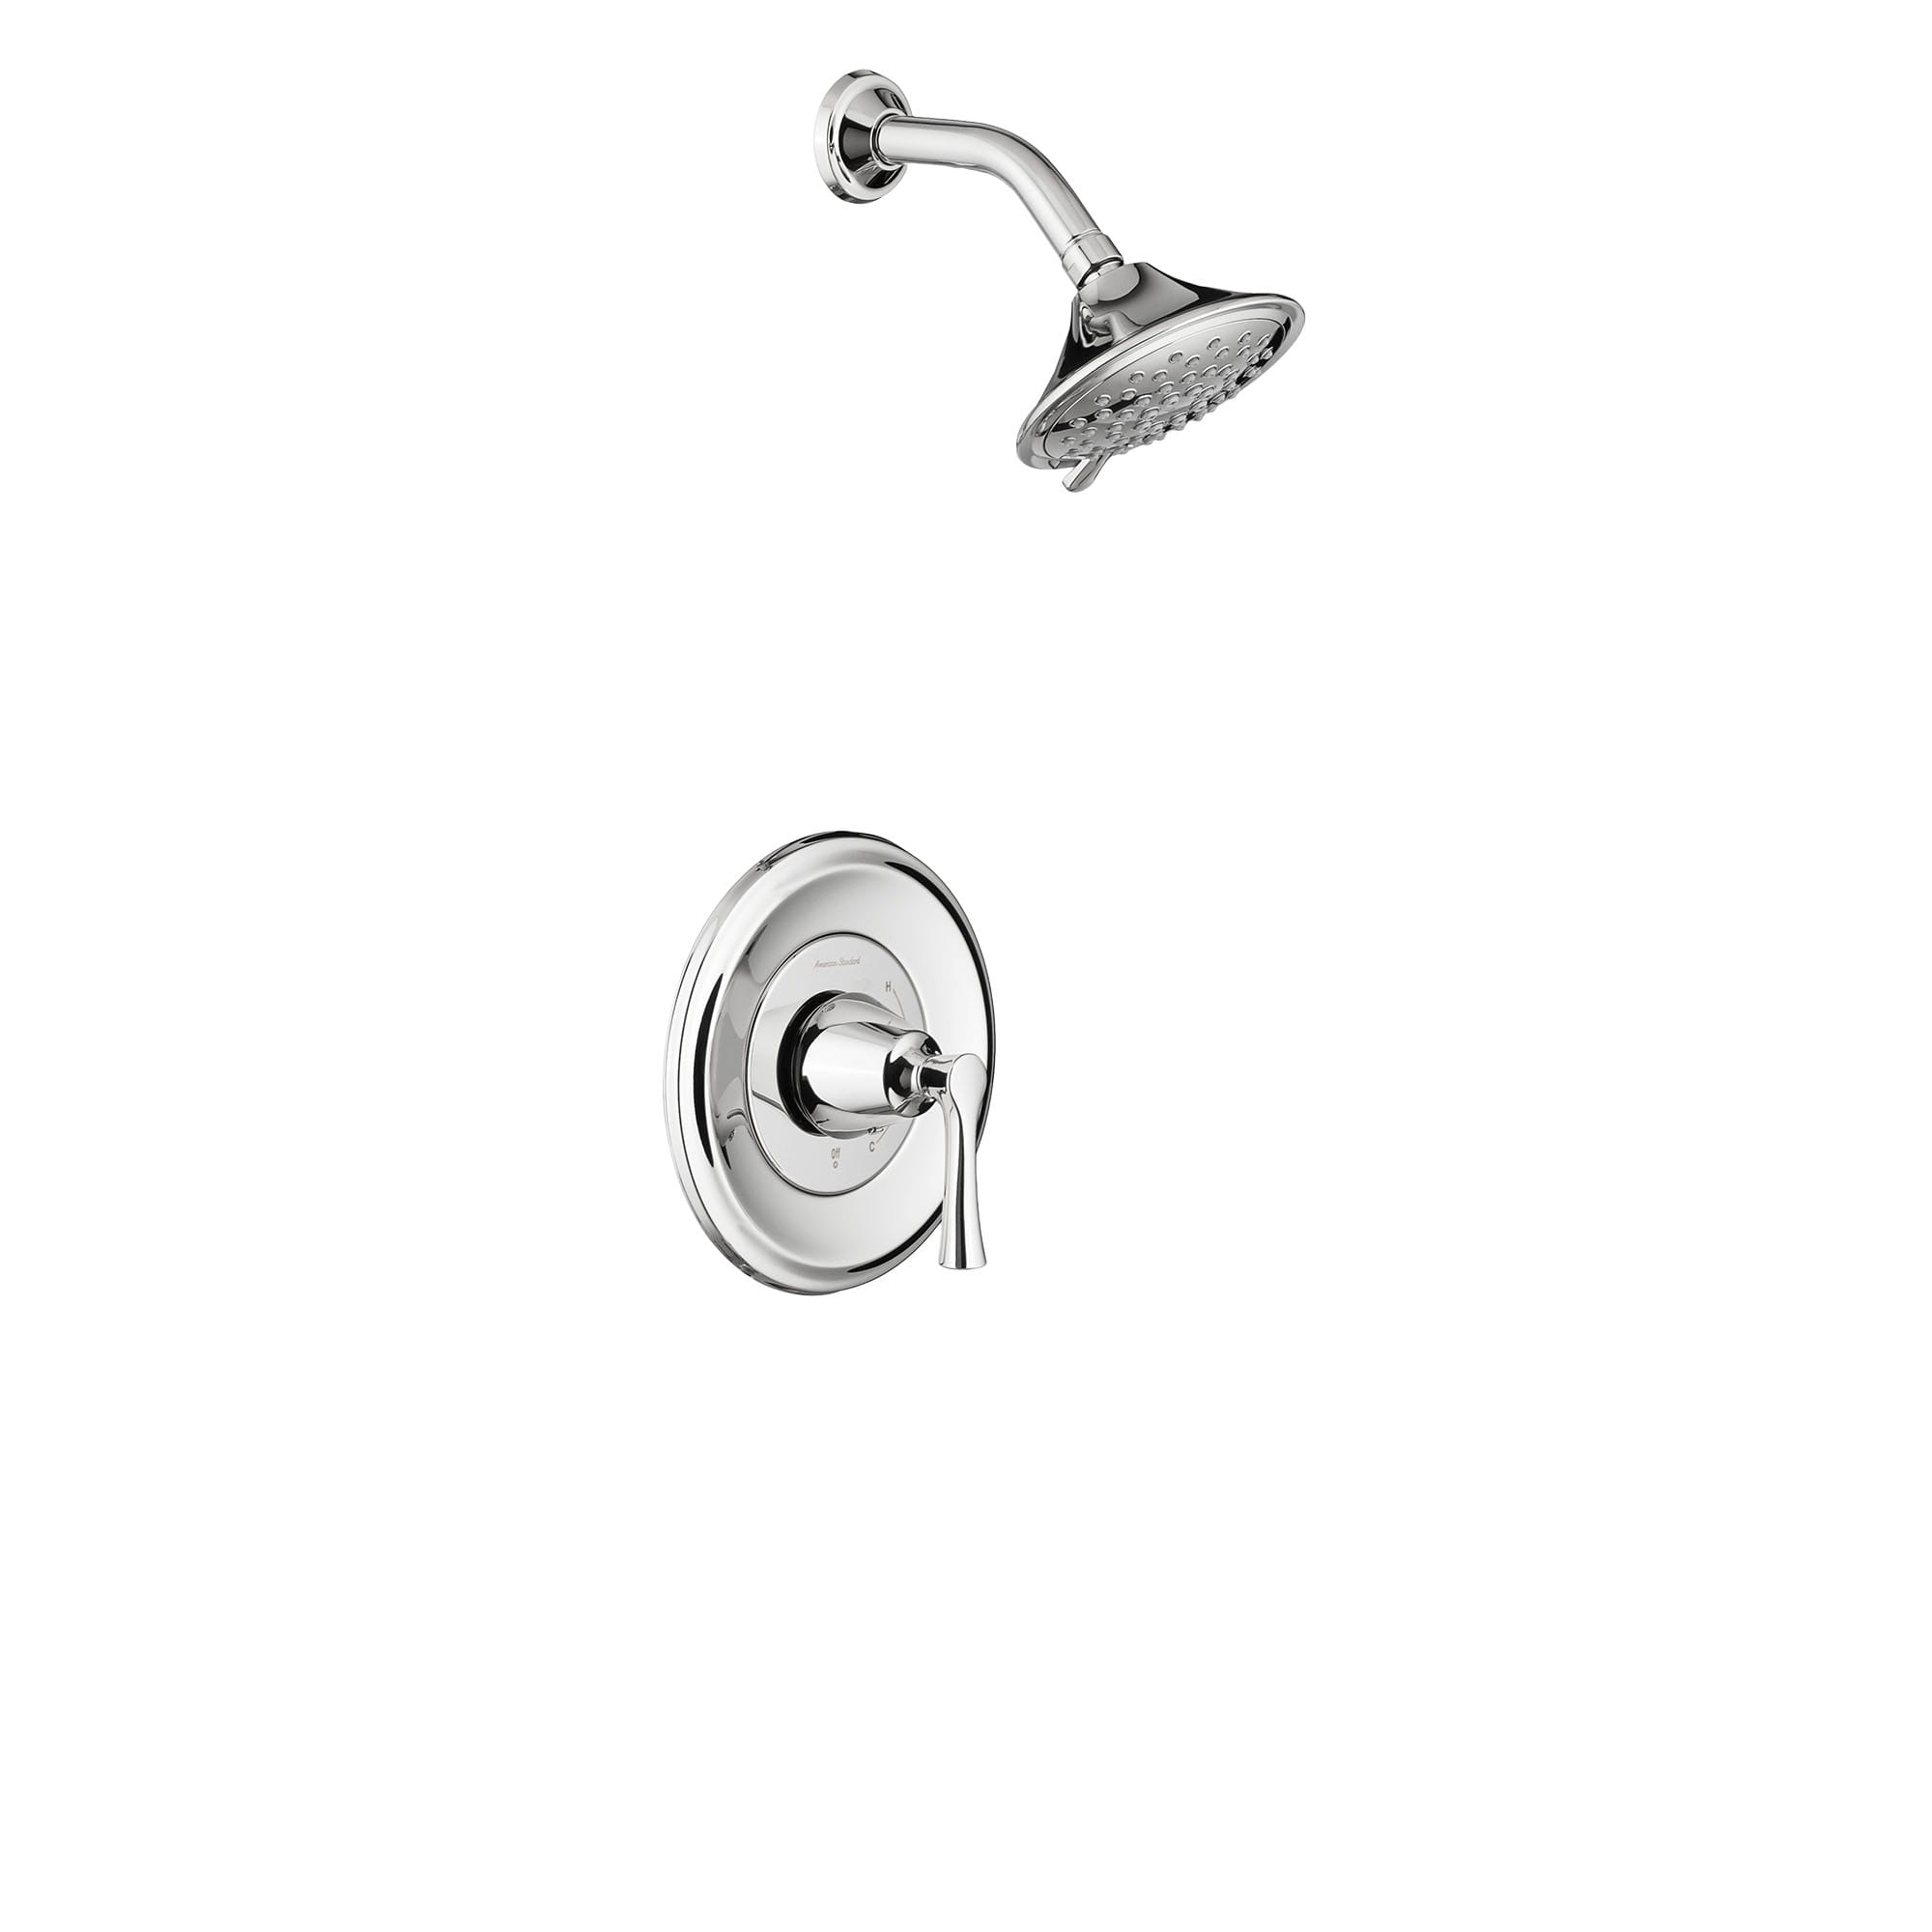 Estate 1.75 GPM Shower Trim Kit with Water-Saving Showerhead and Lever Handle